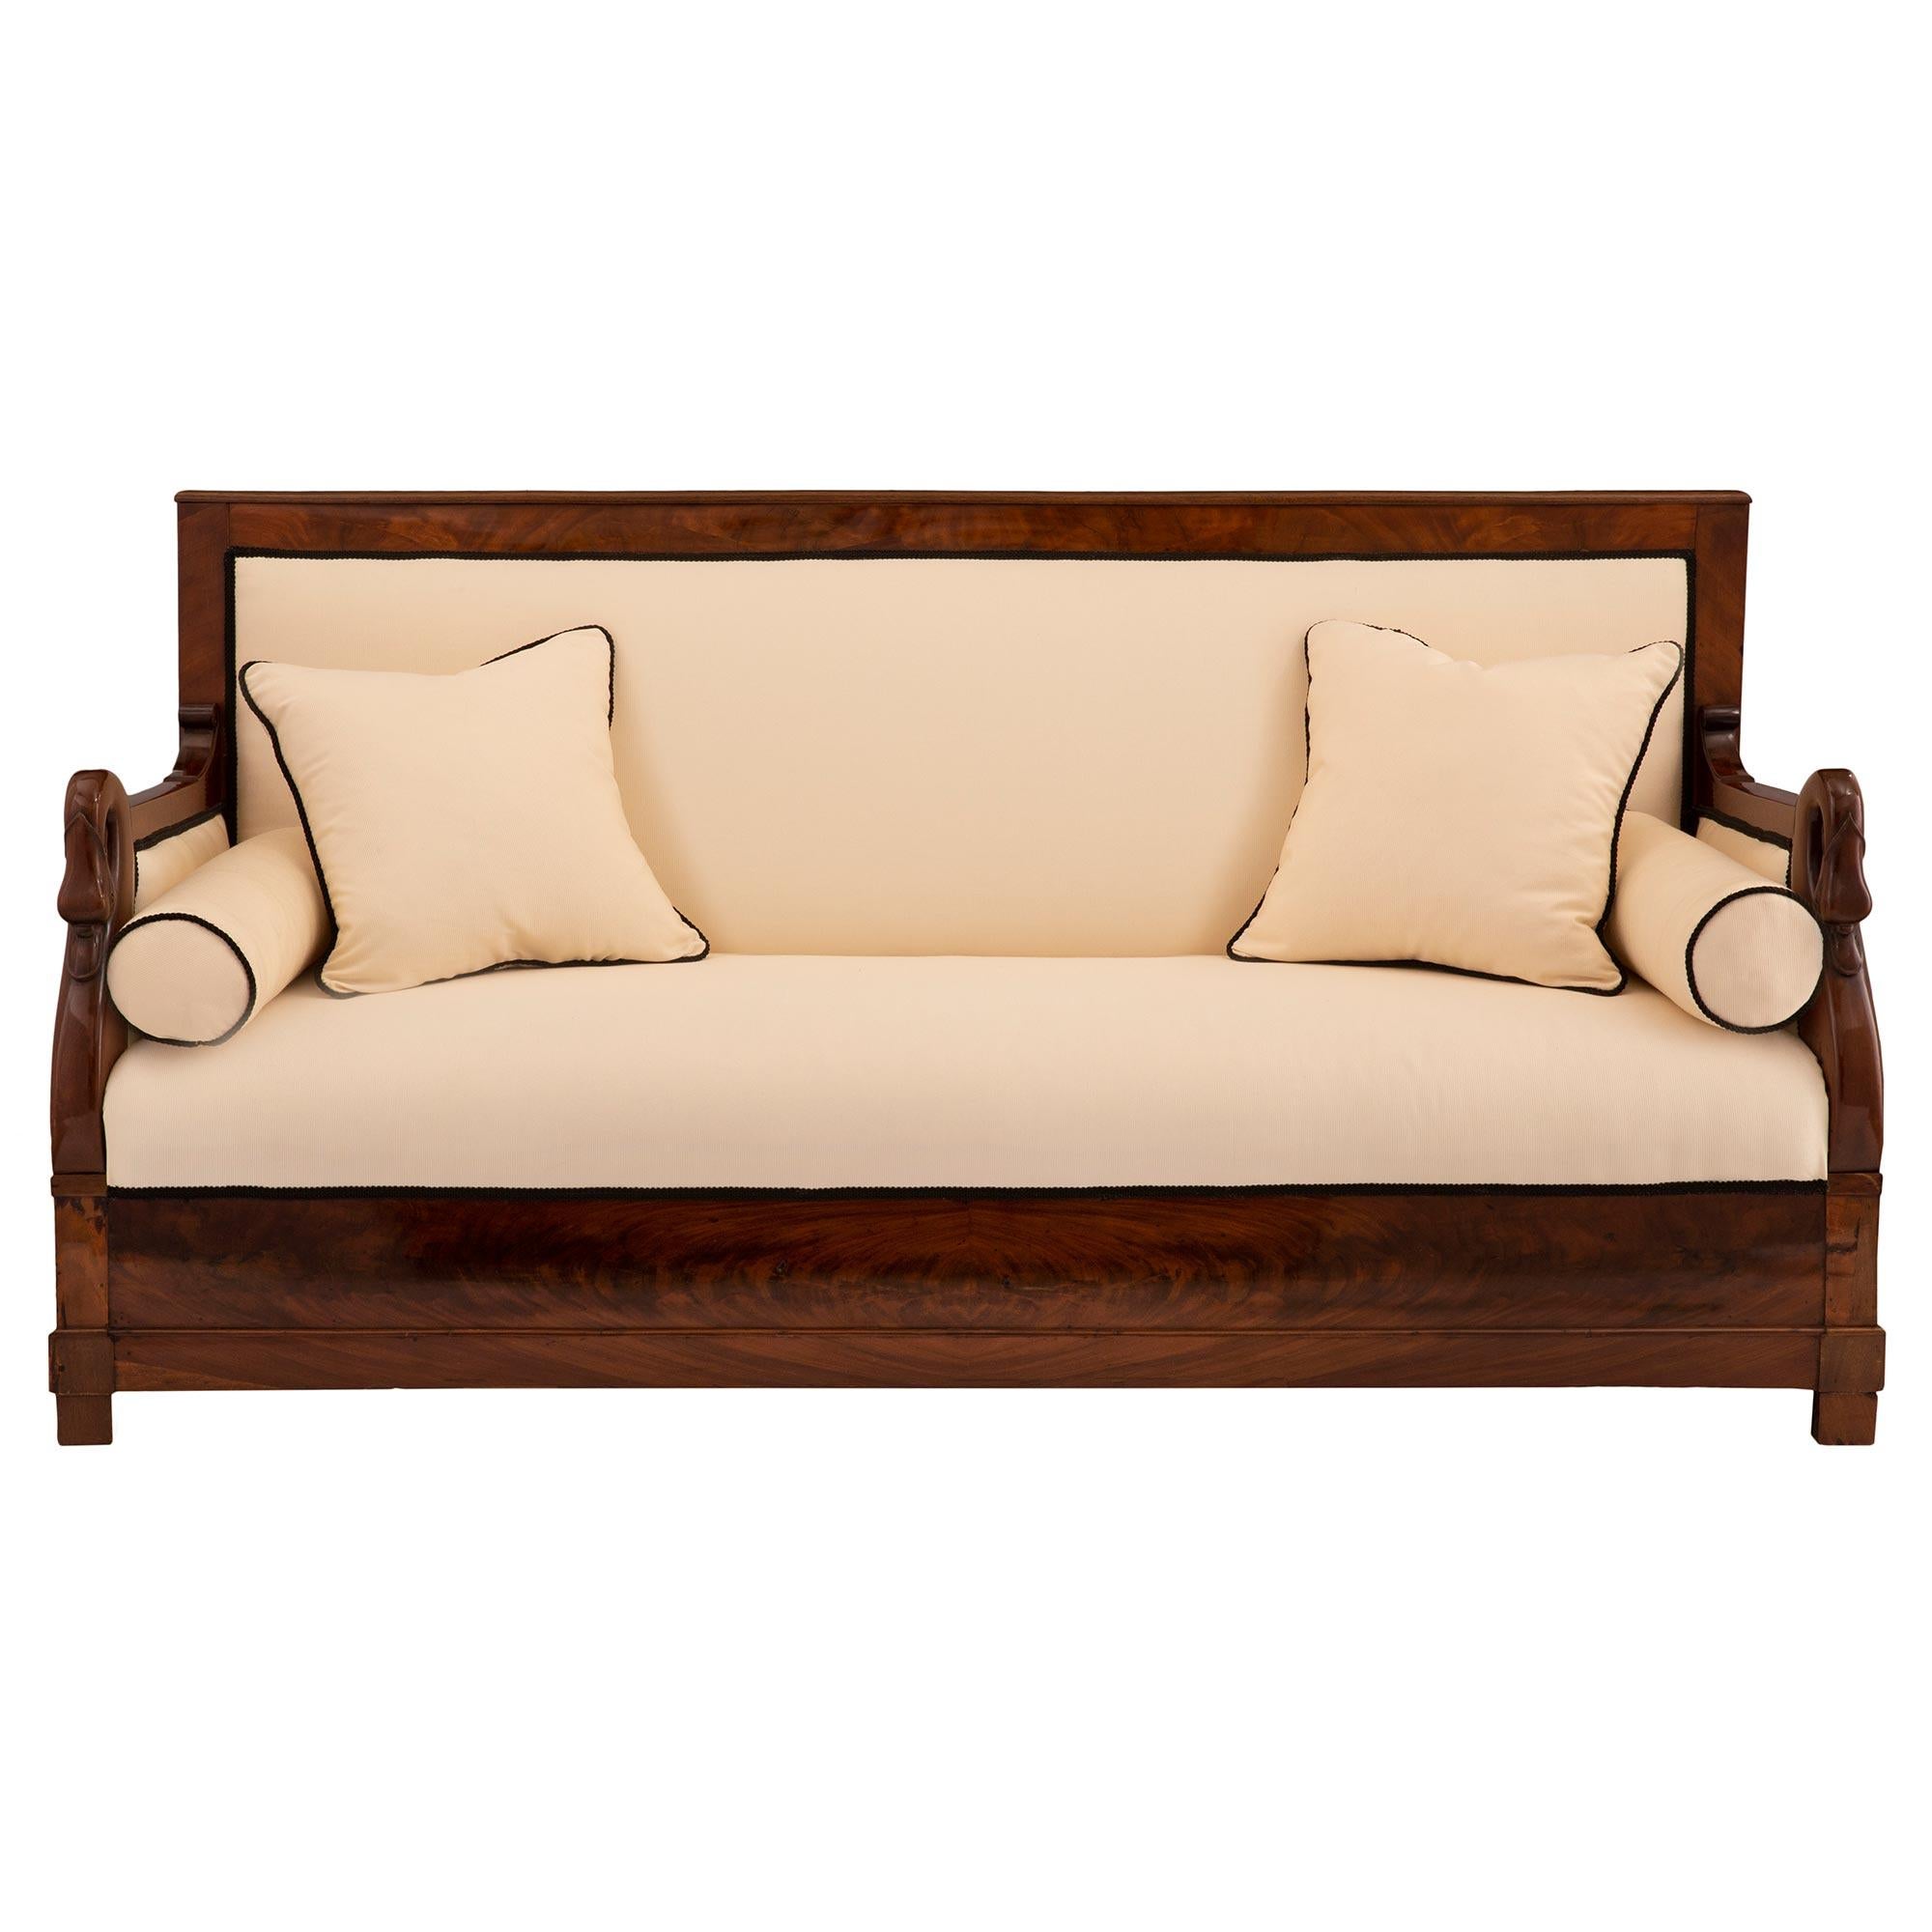 French 19th Century Neoclassical Style Cuban Mahogany Settee In Good Condition For Sale In West Palm Beach, FL